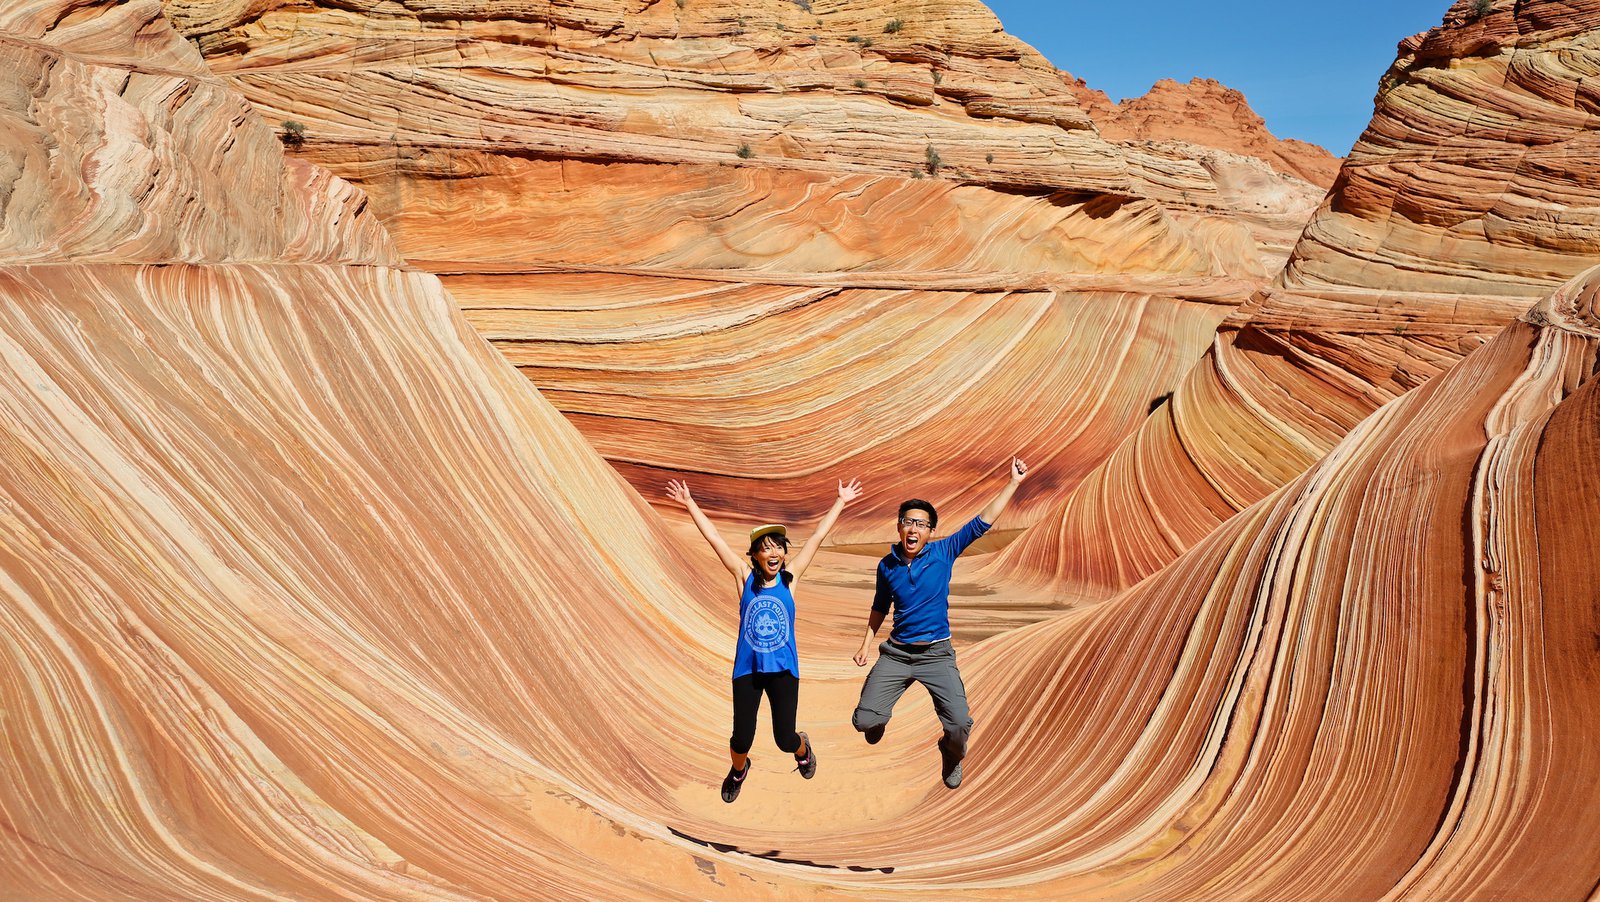 A woman and man raise their arms and open their mouths while jumping at the Wave Rock Formation in Arizona.